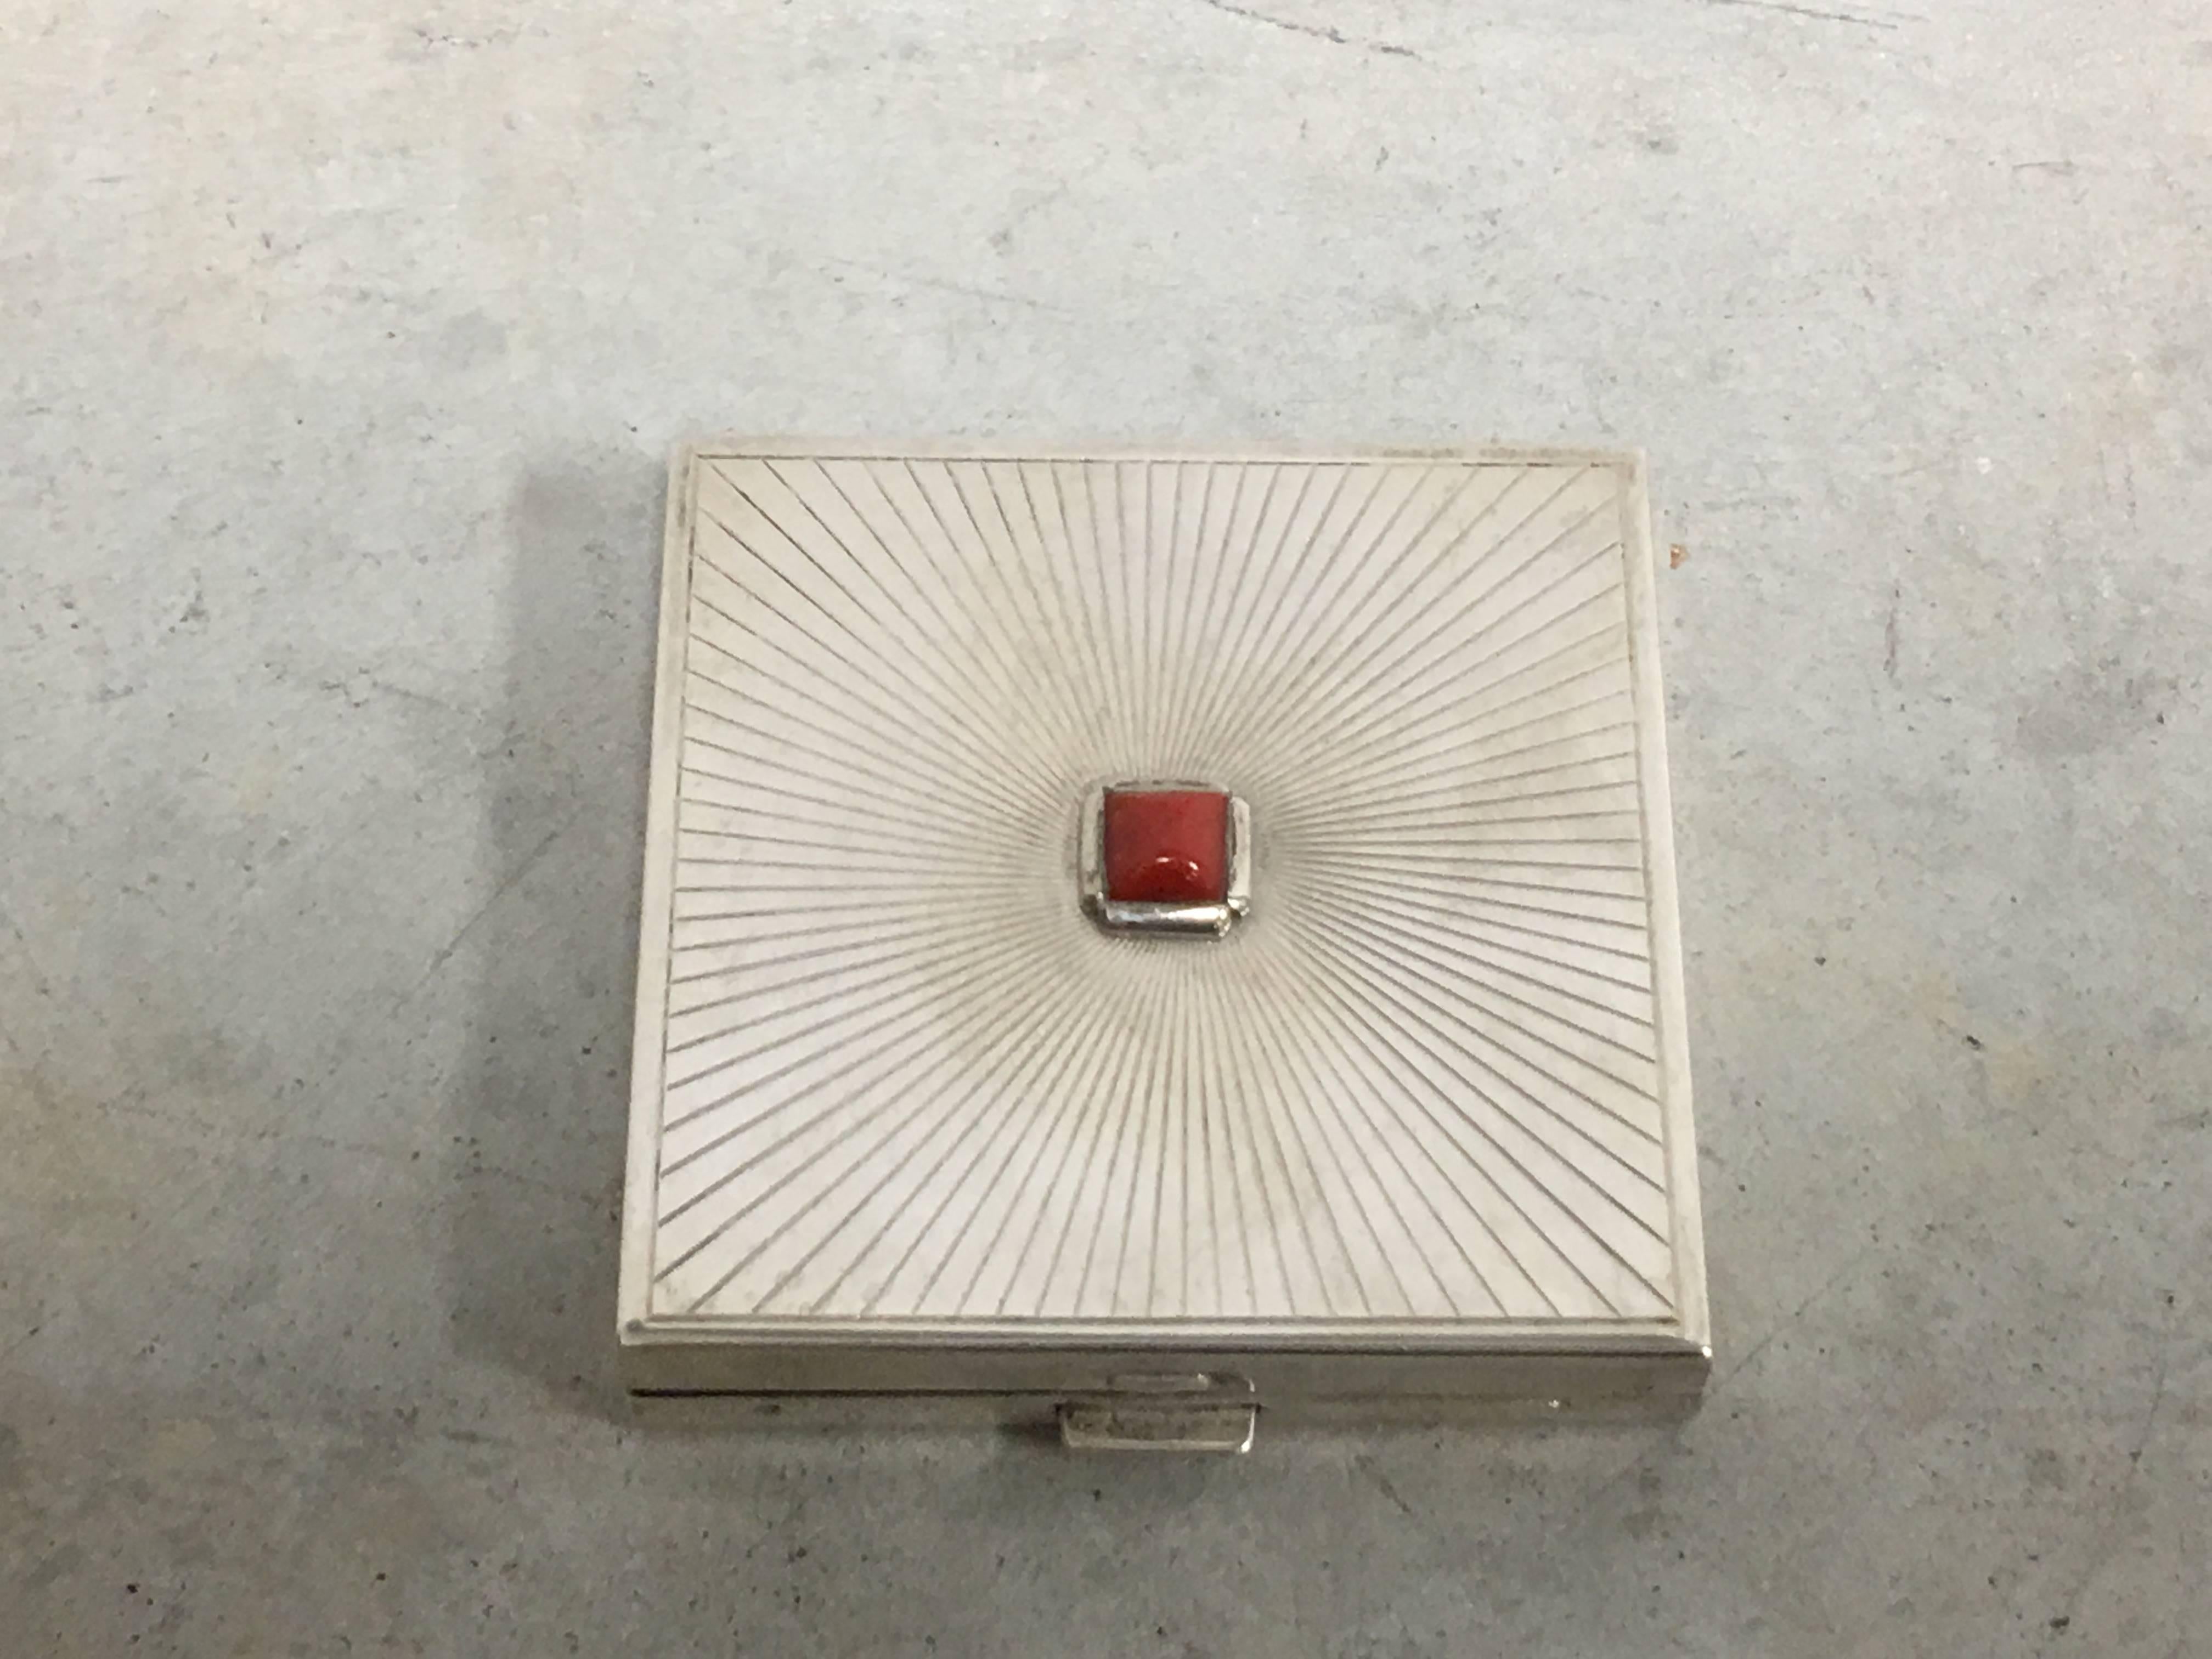 Offered is a stunning, Cartier sterling silver compact with a red carnelian gem inset, circa 1920. Cartier captures the true essence of Art Deco sophistication with this exquisite sterling silver box. Such diminutive objet d'art are found most often